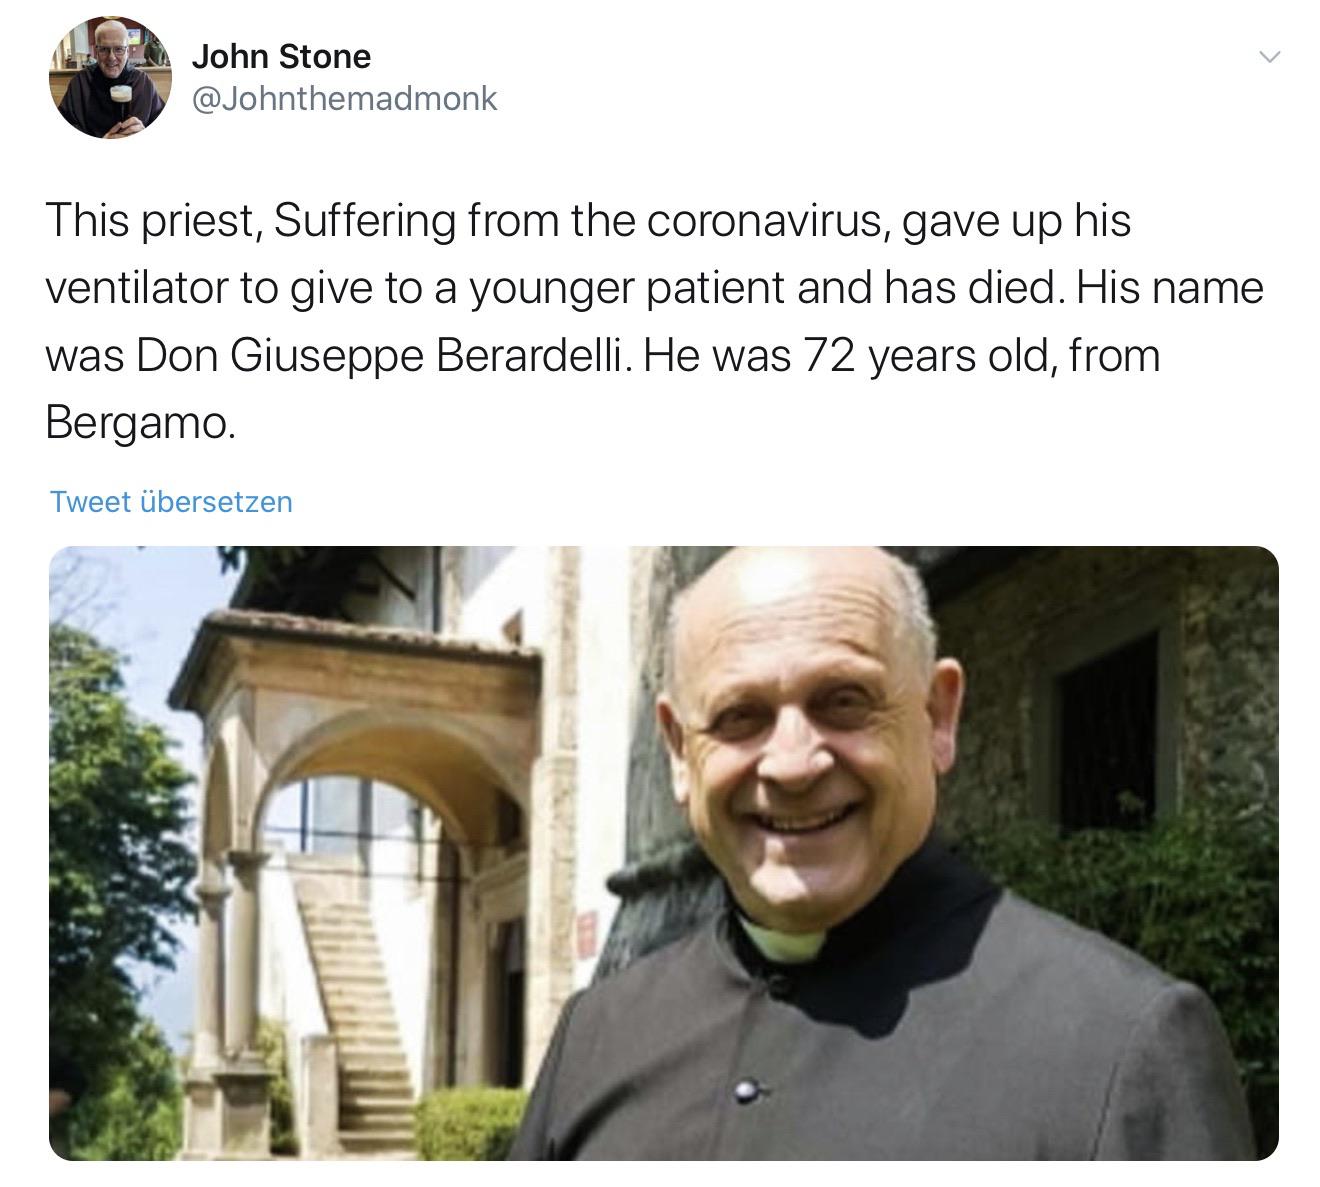 Coronavirus - John Stone This priest, Suffering from the coronavirus, gave up his ventilator to give to a younger patient and has died. His name was Don Giuseppe Berardelli. He was 72 years old, from Bergamo. Tweet bersetzen